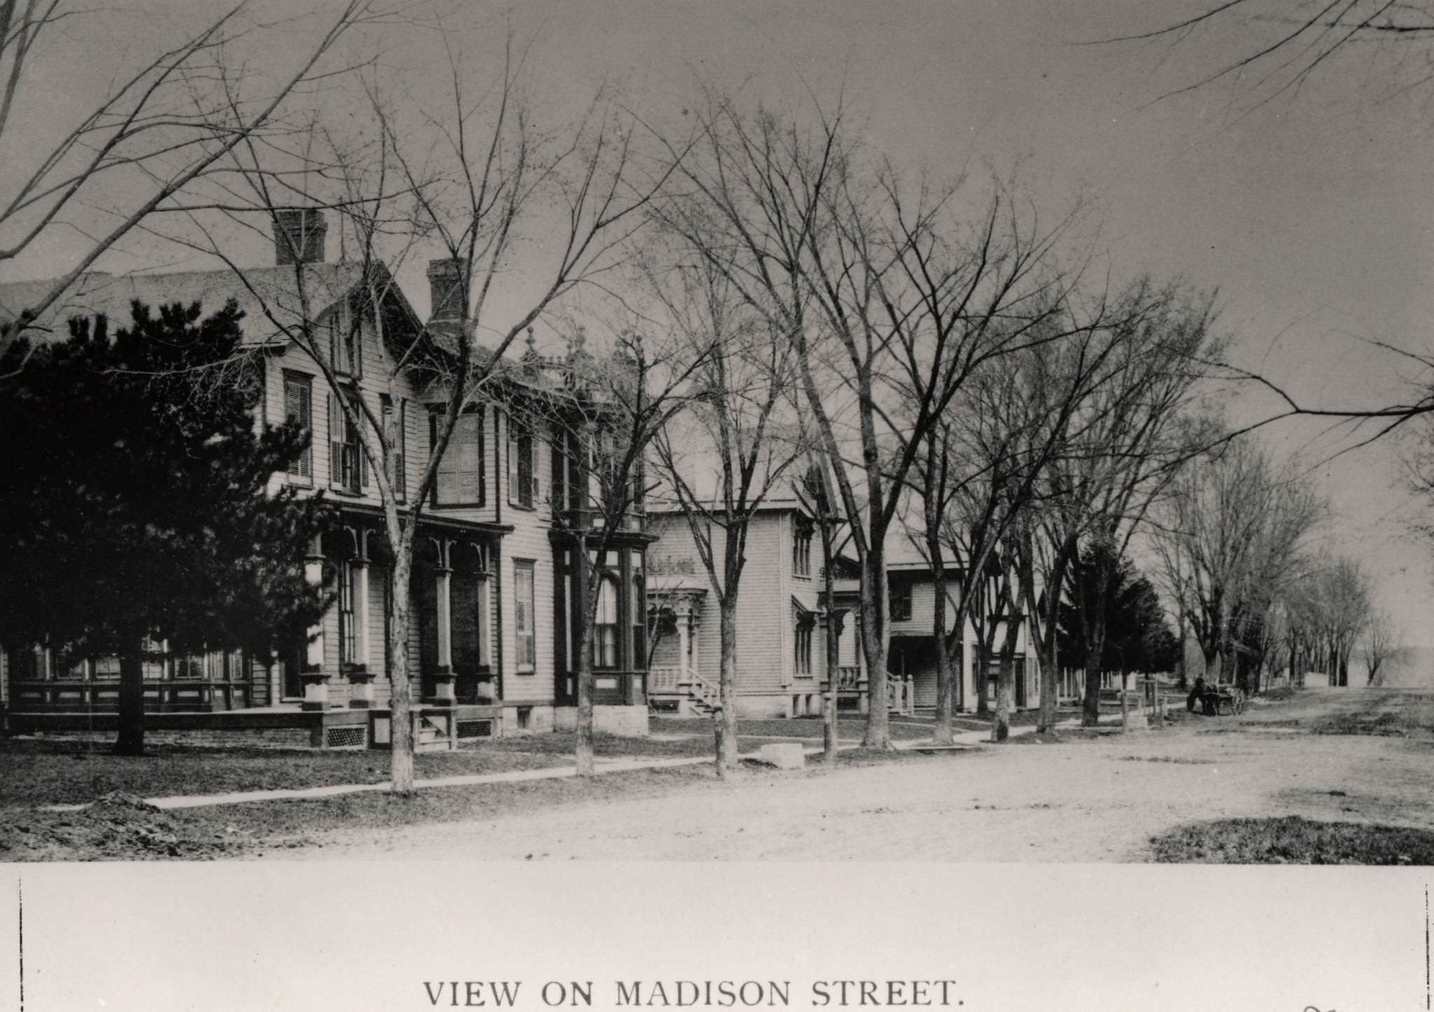 View down Madison Street with houses along sidewalk, Janesville, Wisconsin, 1893.